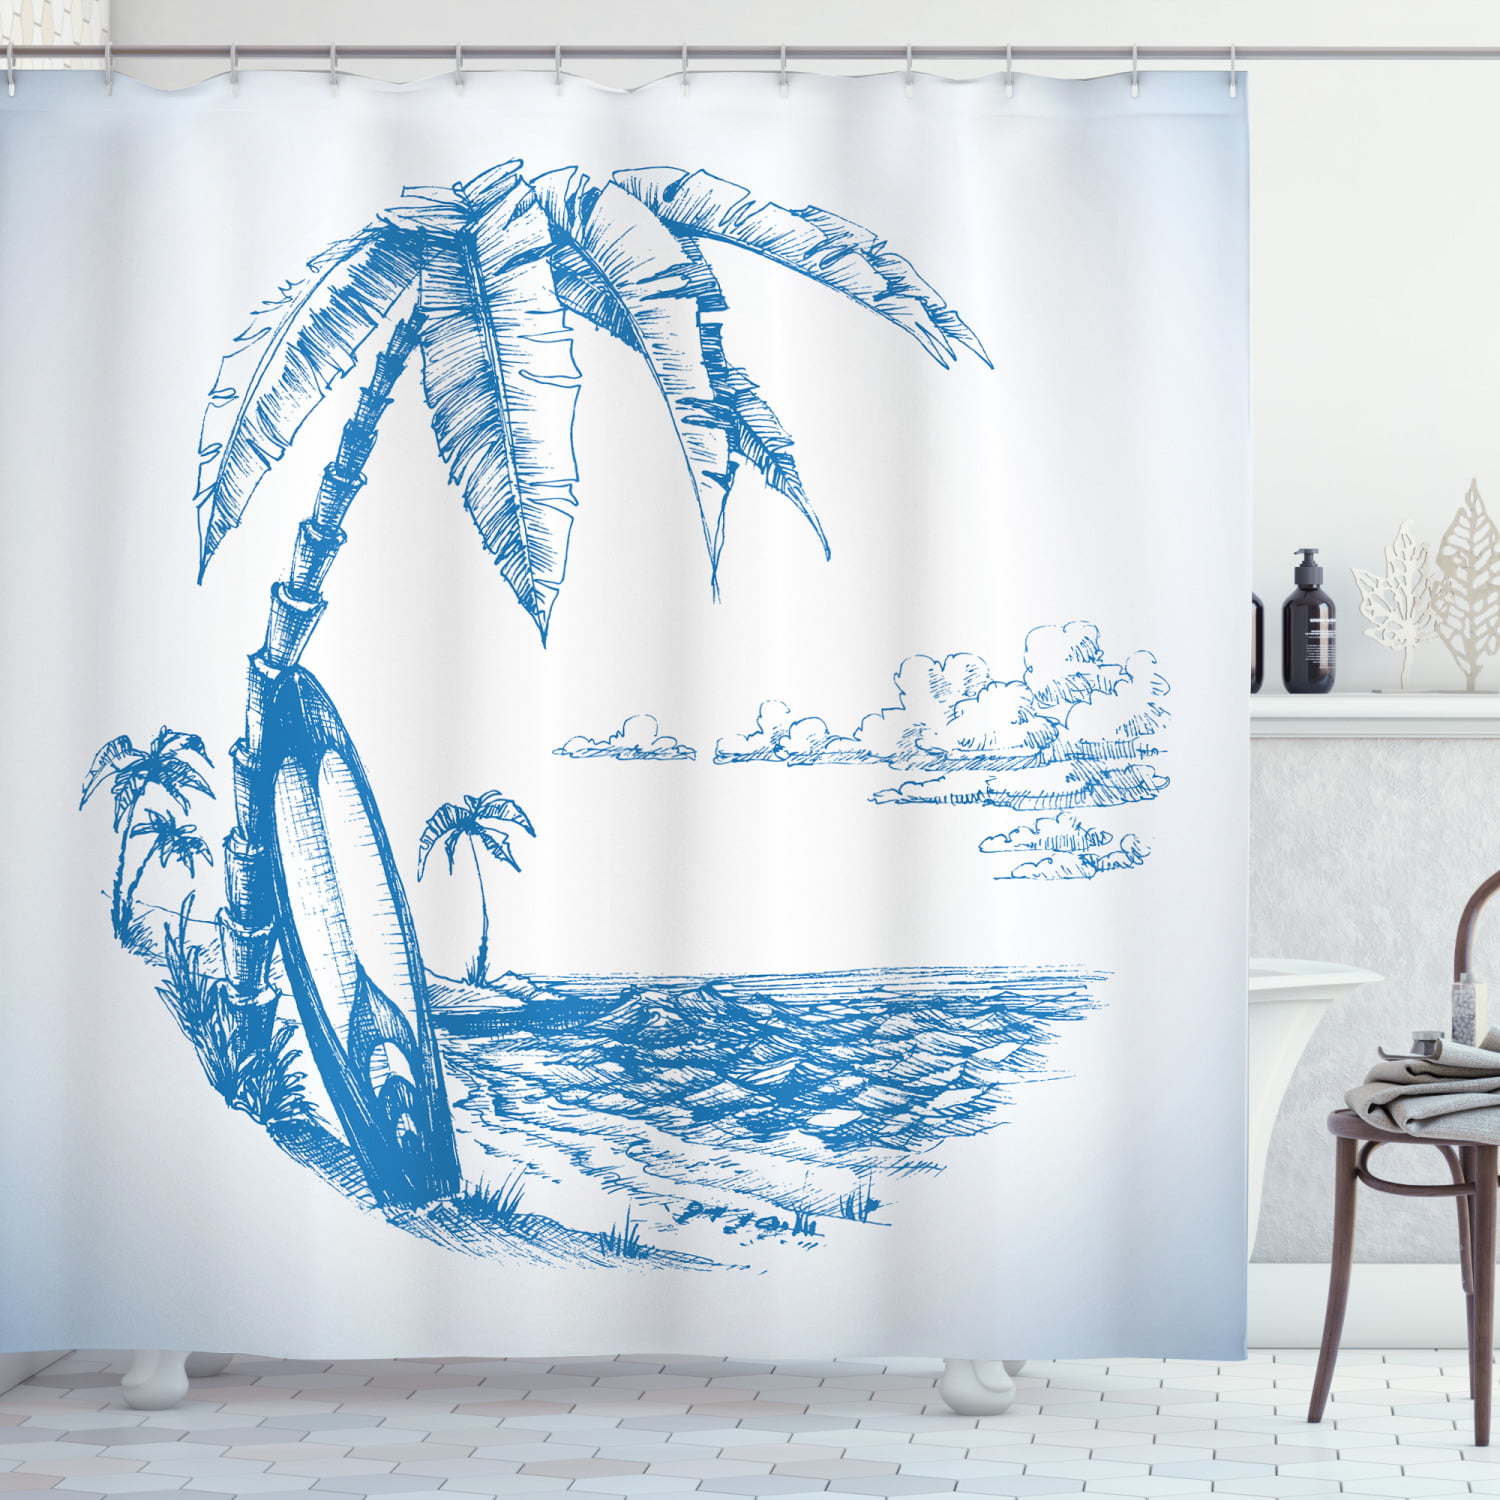 70" X72" NEW COLORFUL BEACH & SURFING THEMED FABRIC SHOWER CURTAIN 